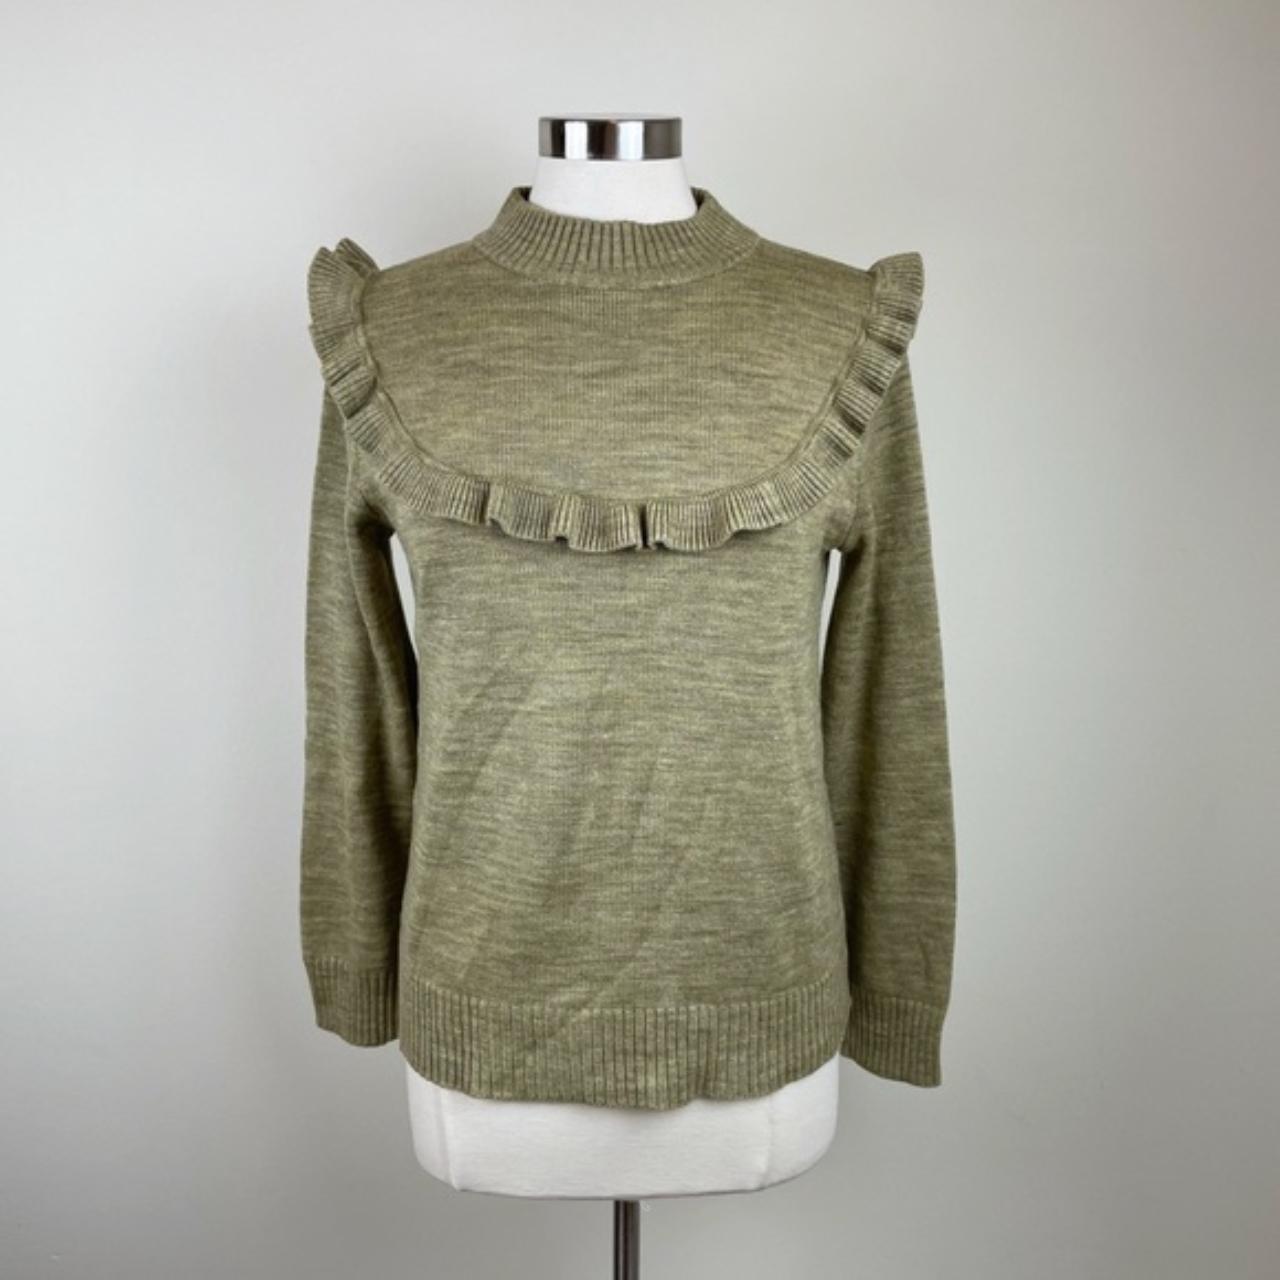 Sears Women's Green and Brown Jumper